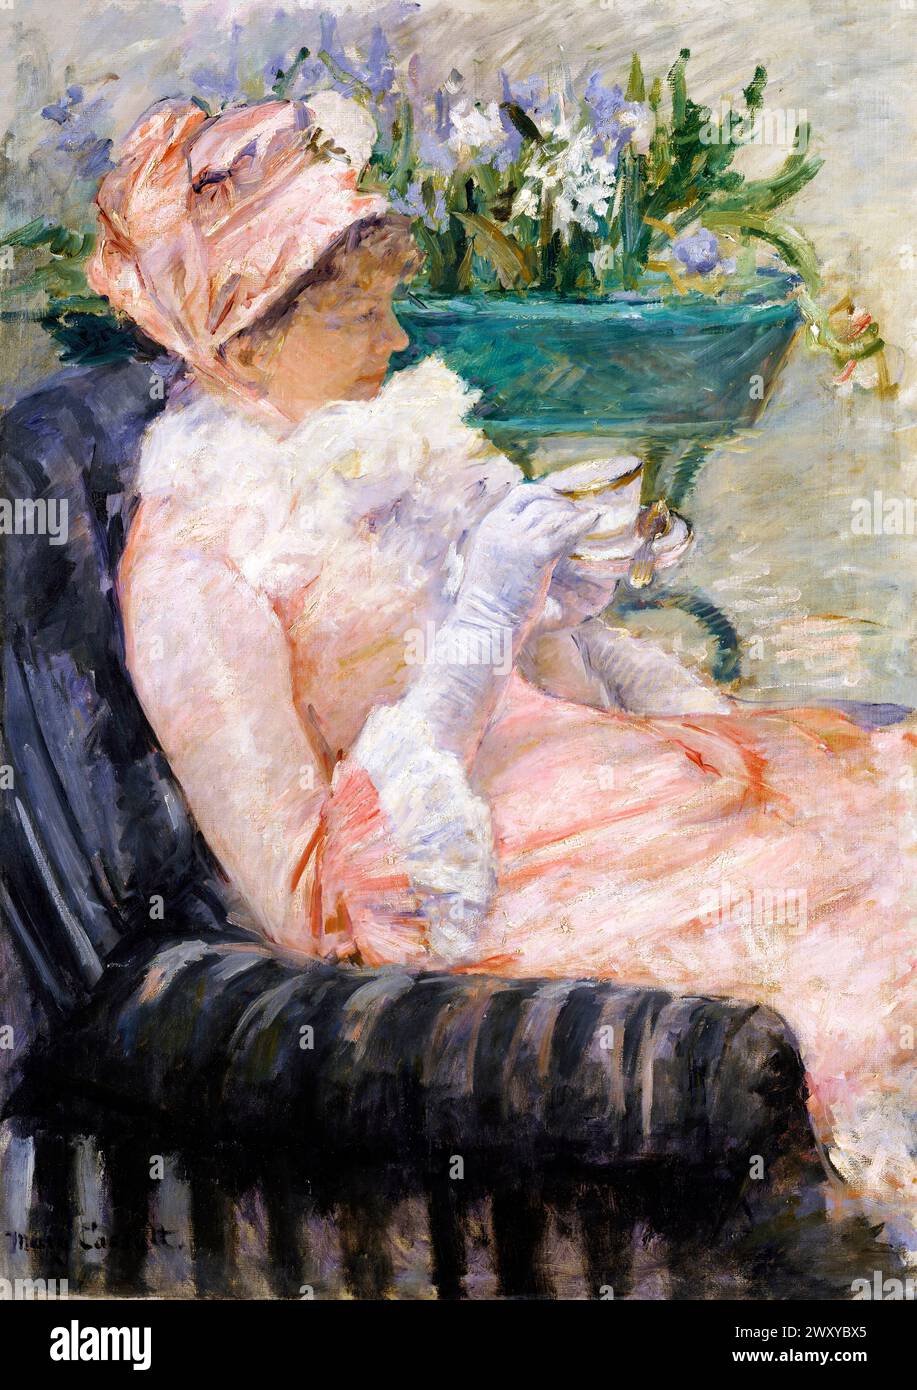 The Cup of Tea  painting in high resolution by Mary Cassatt. Original from The MET Museum. Stock Photo